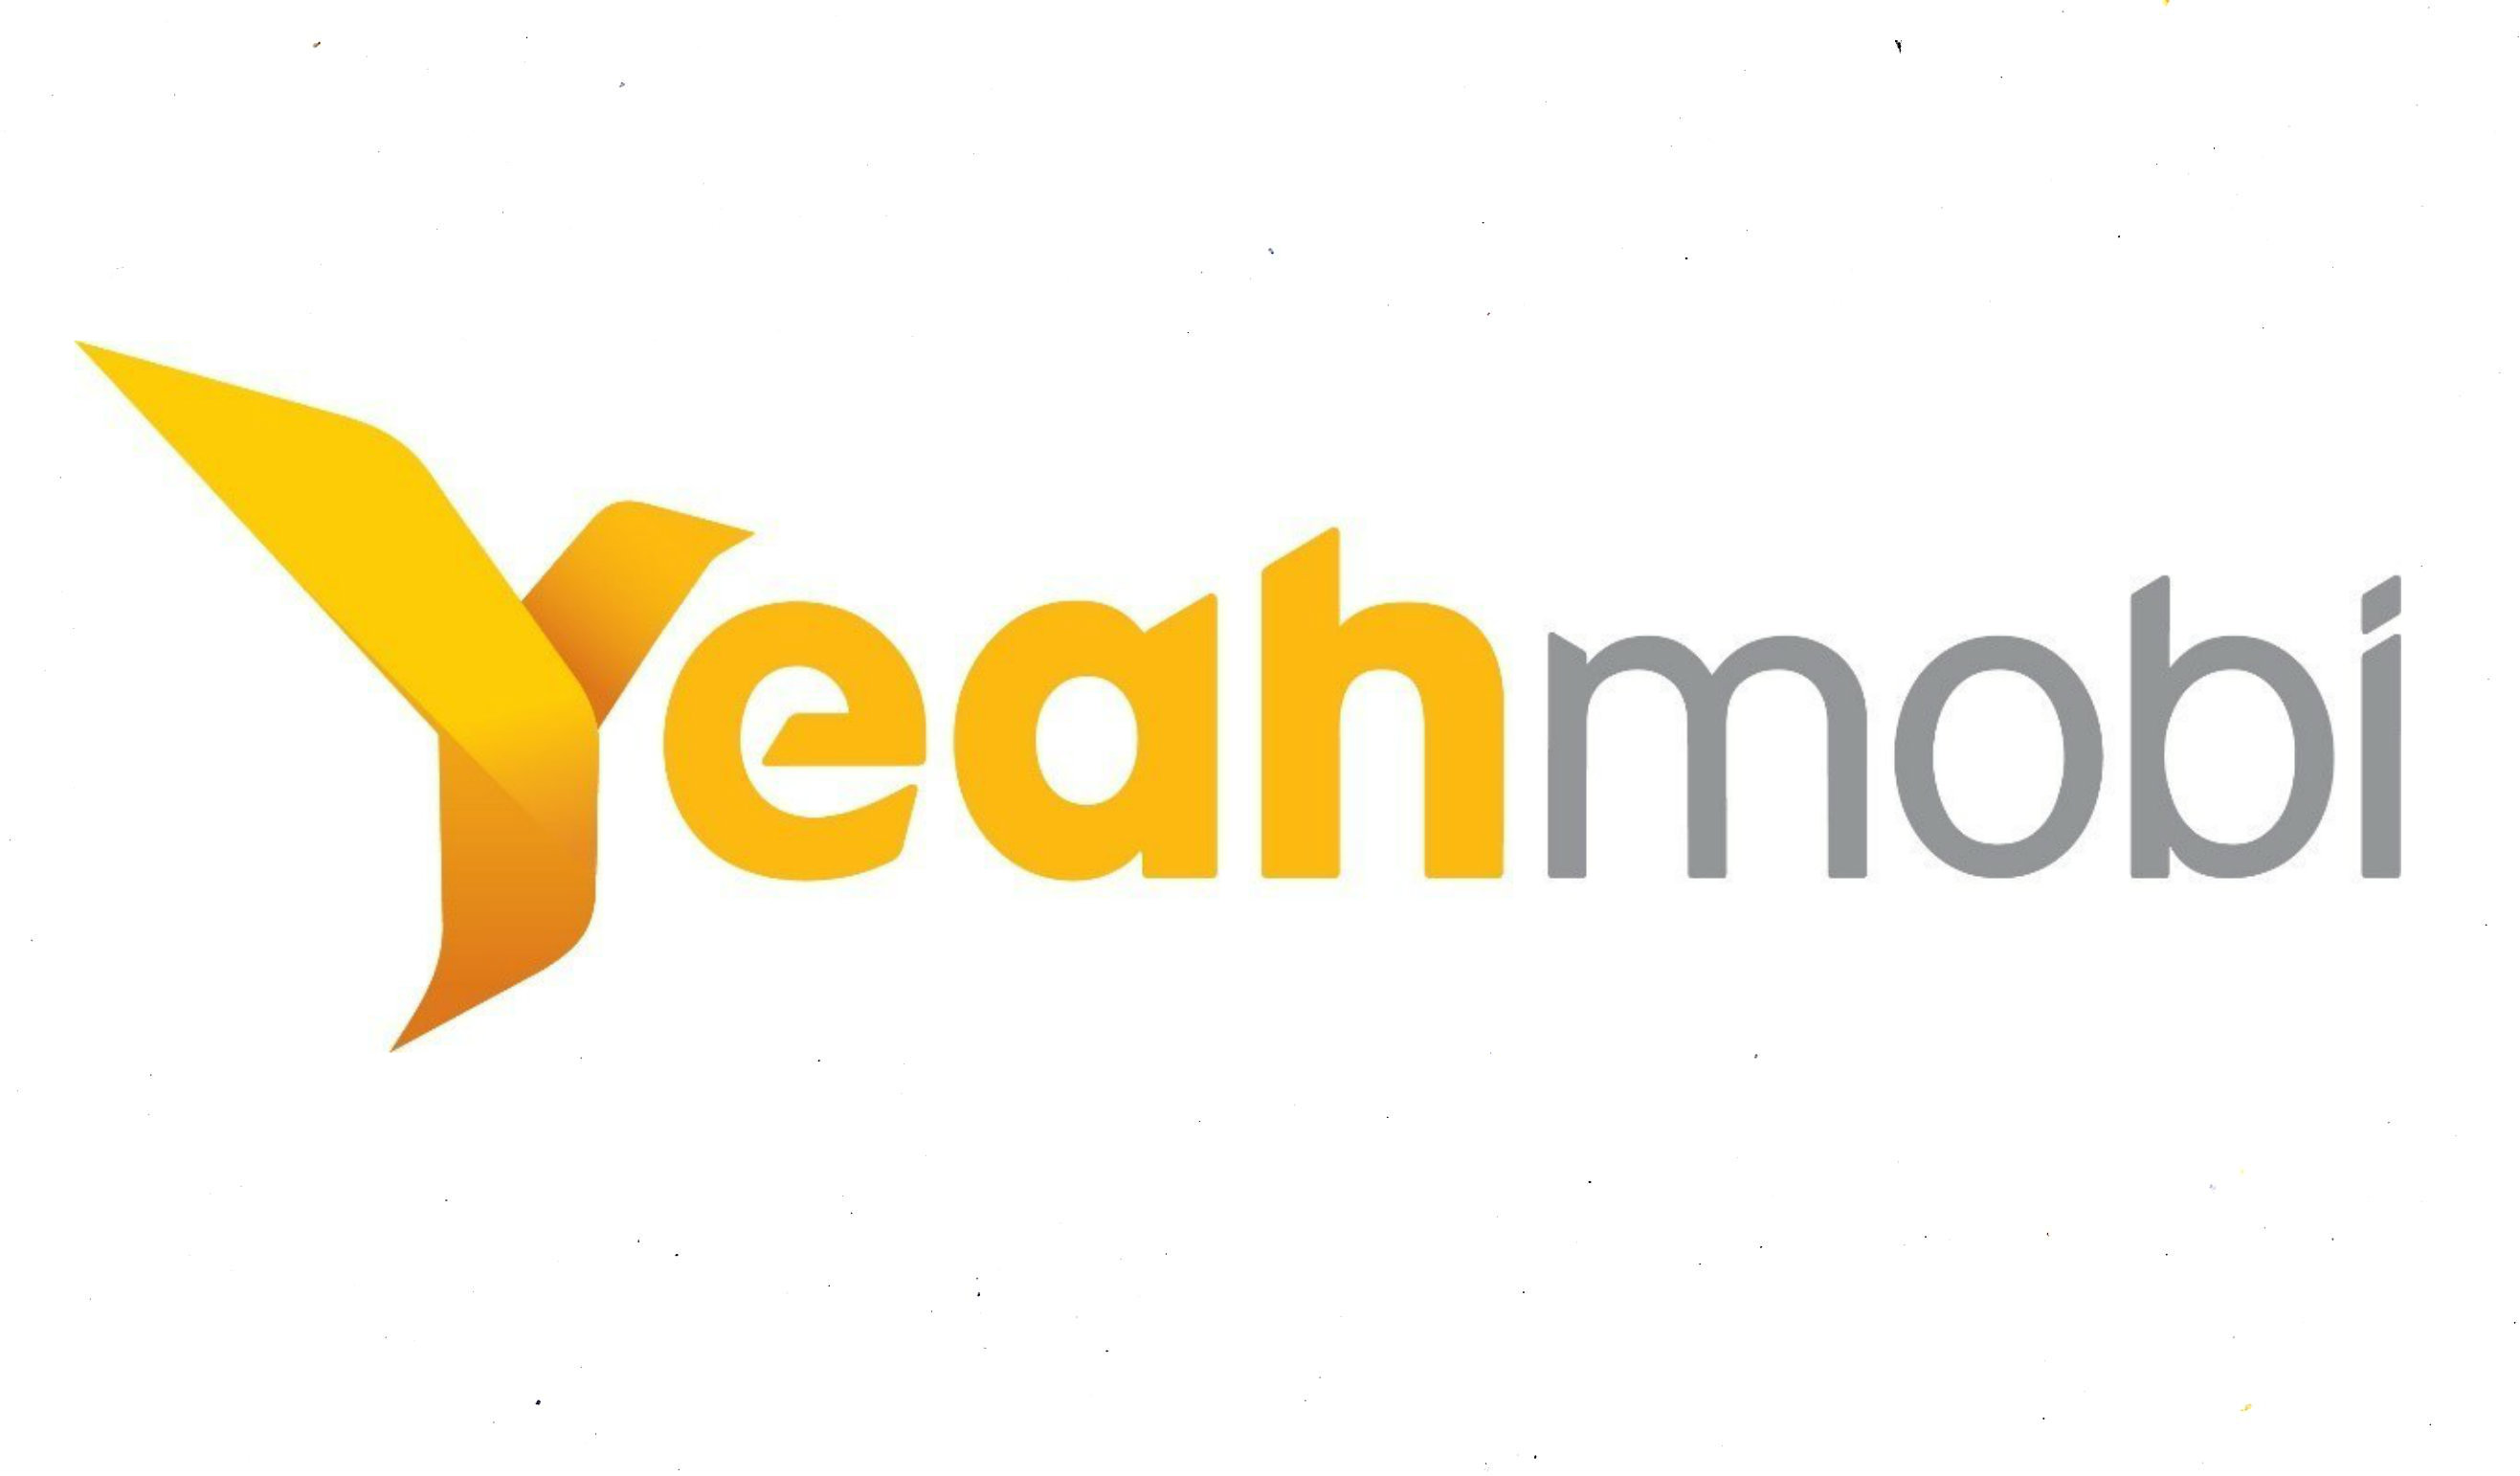 Mobile Advertising Network Yeahmobi Raises About $100 Million in Funding for Expansion